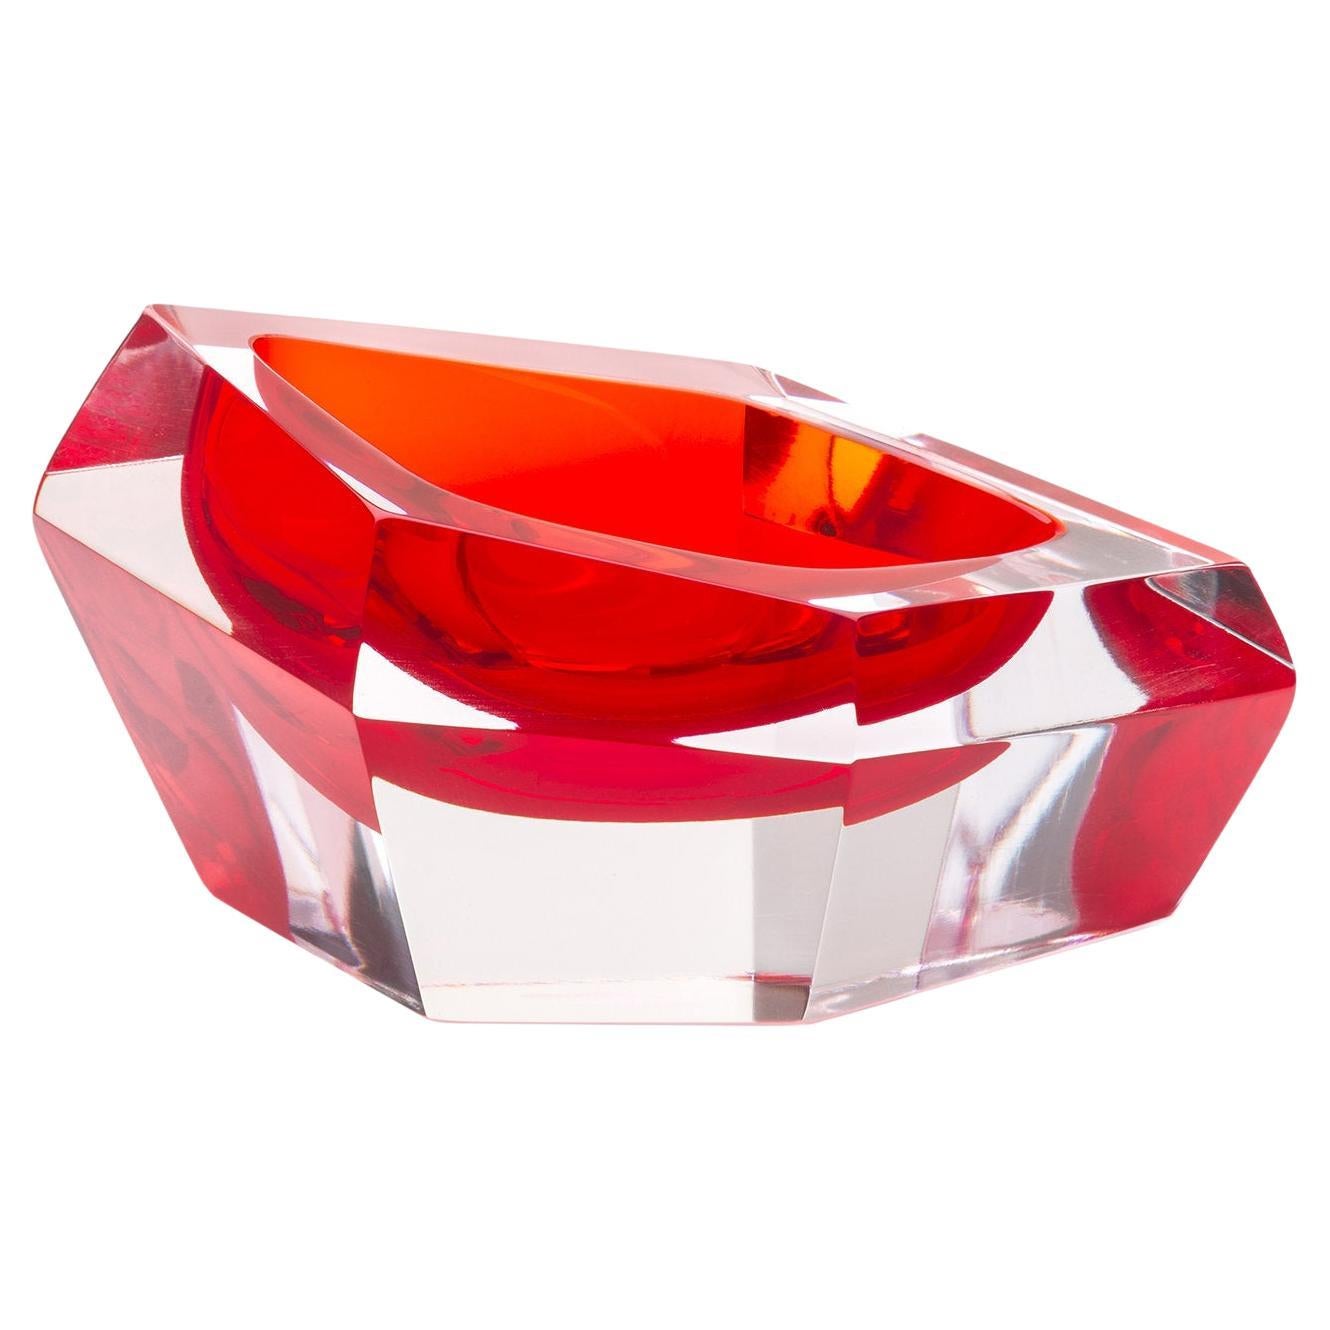 Kastle Small Red Centerpiece by Karim Rashid For Sale